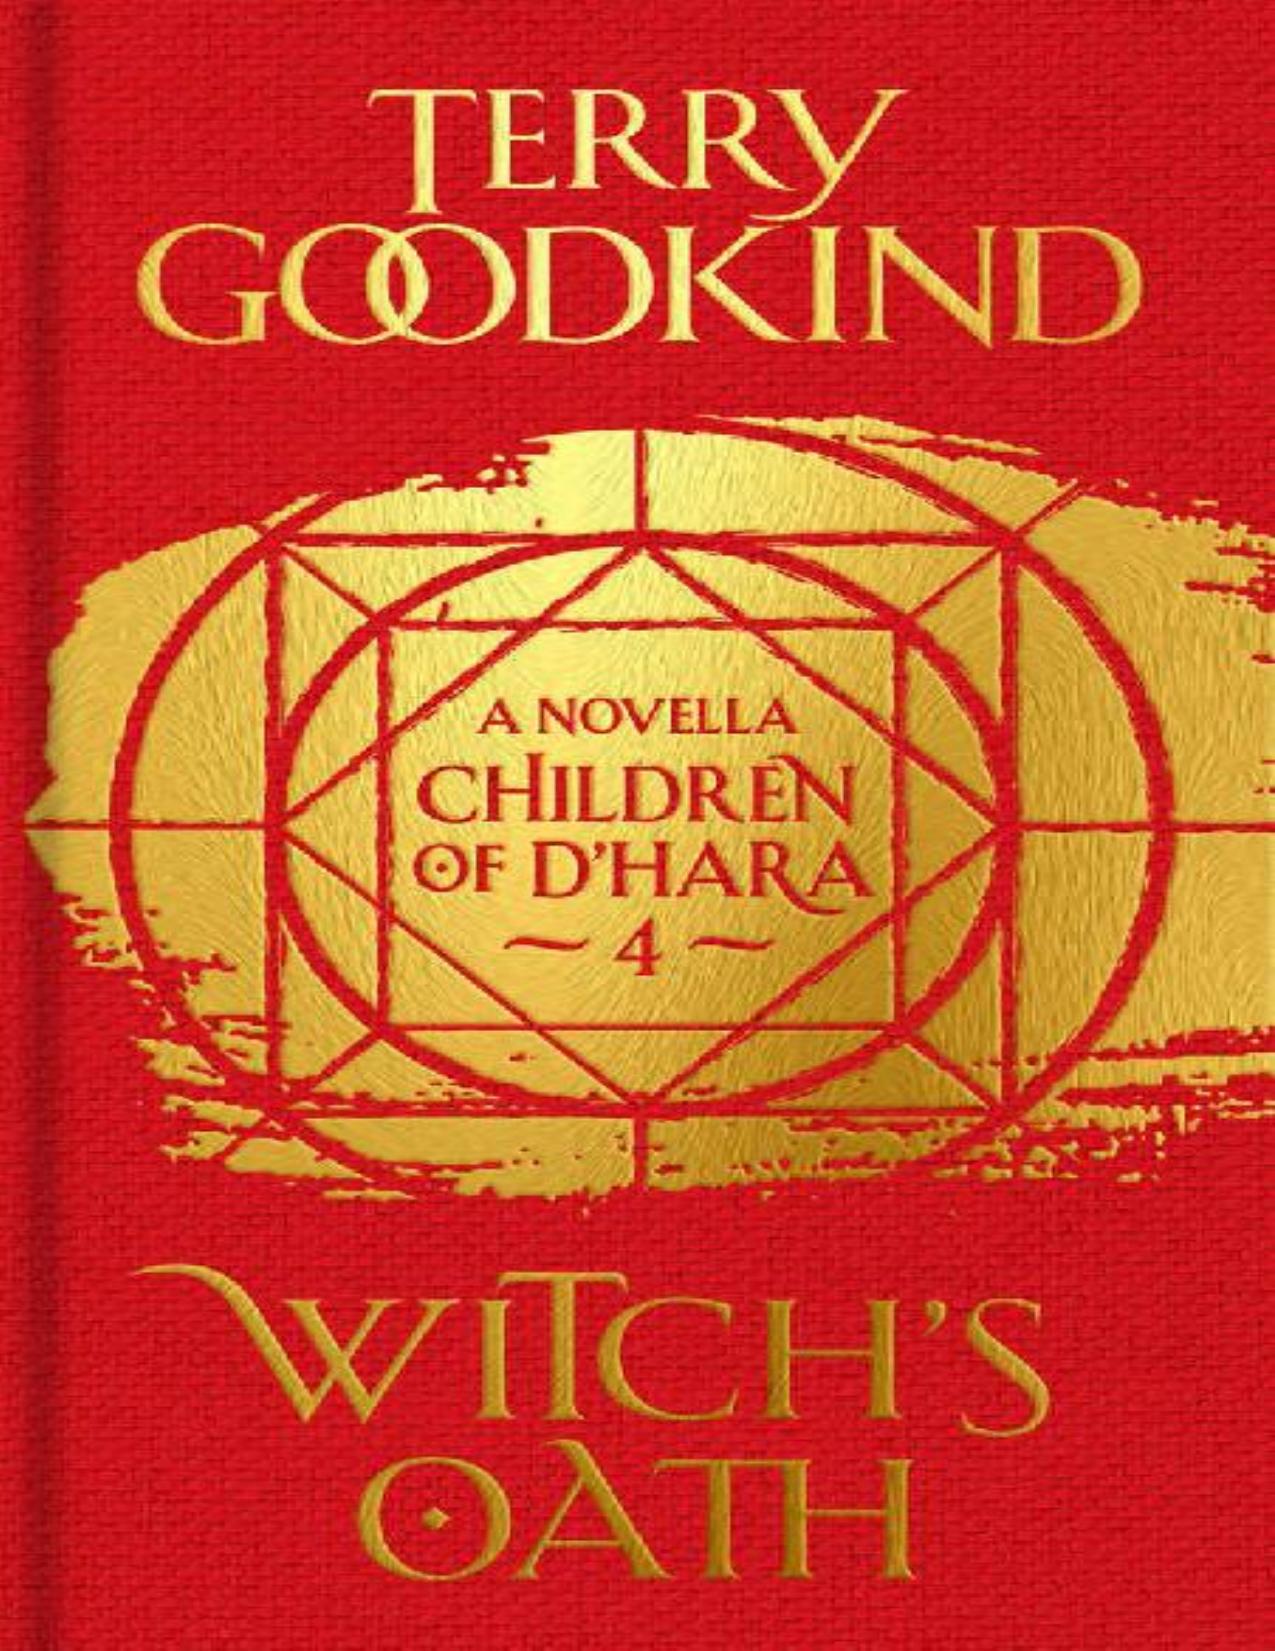 Witch's Oath: The Children of D'Hara, episode 4 by Terry Goodkind